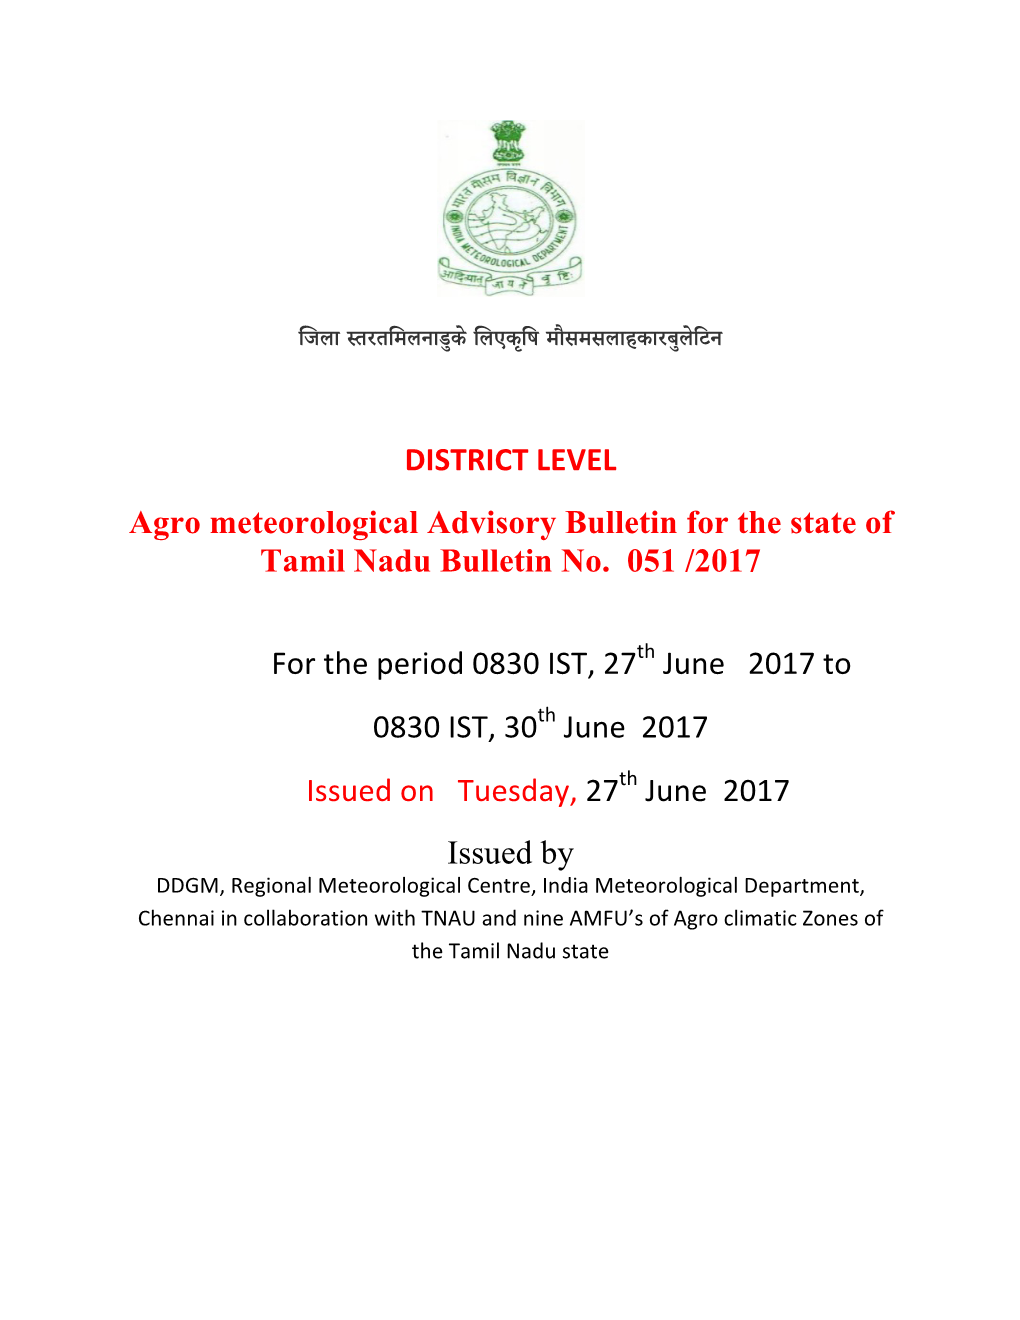 DISTRICT LEVEL Agro Meteorological Advisory Bulletin for the State of Tamil Nadu Bulletin No